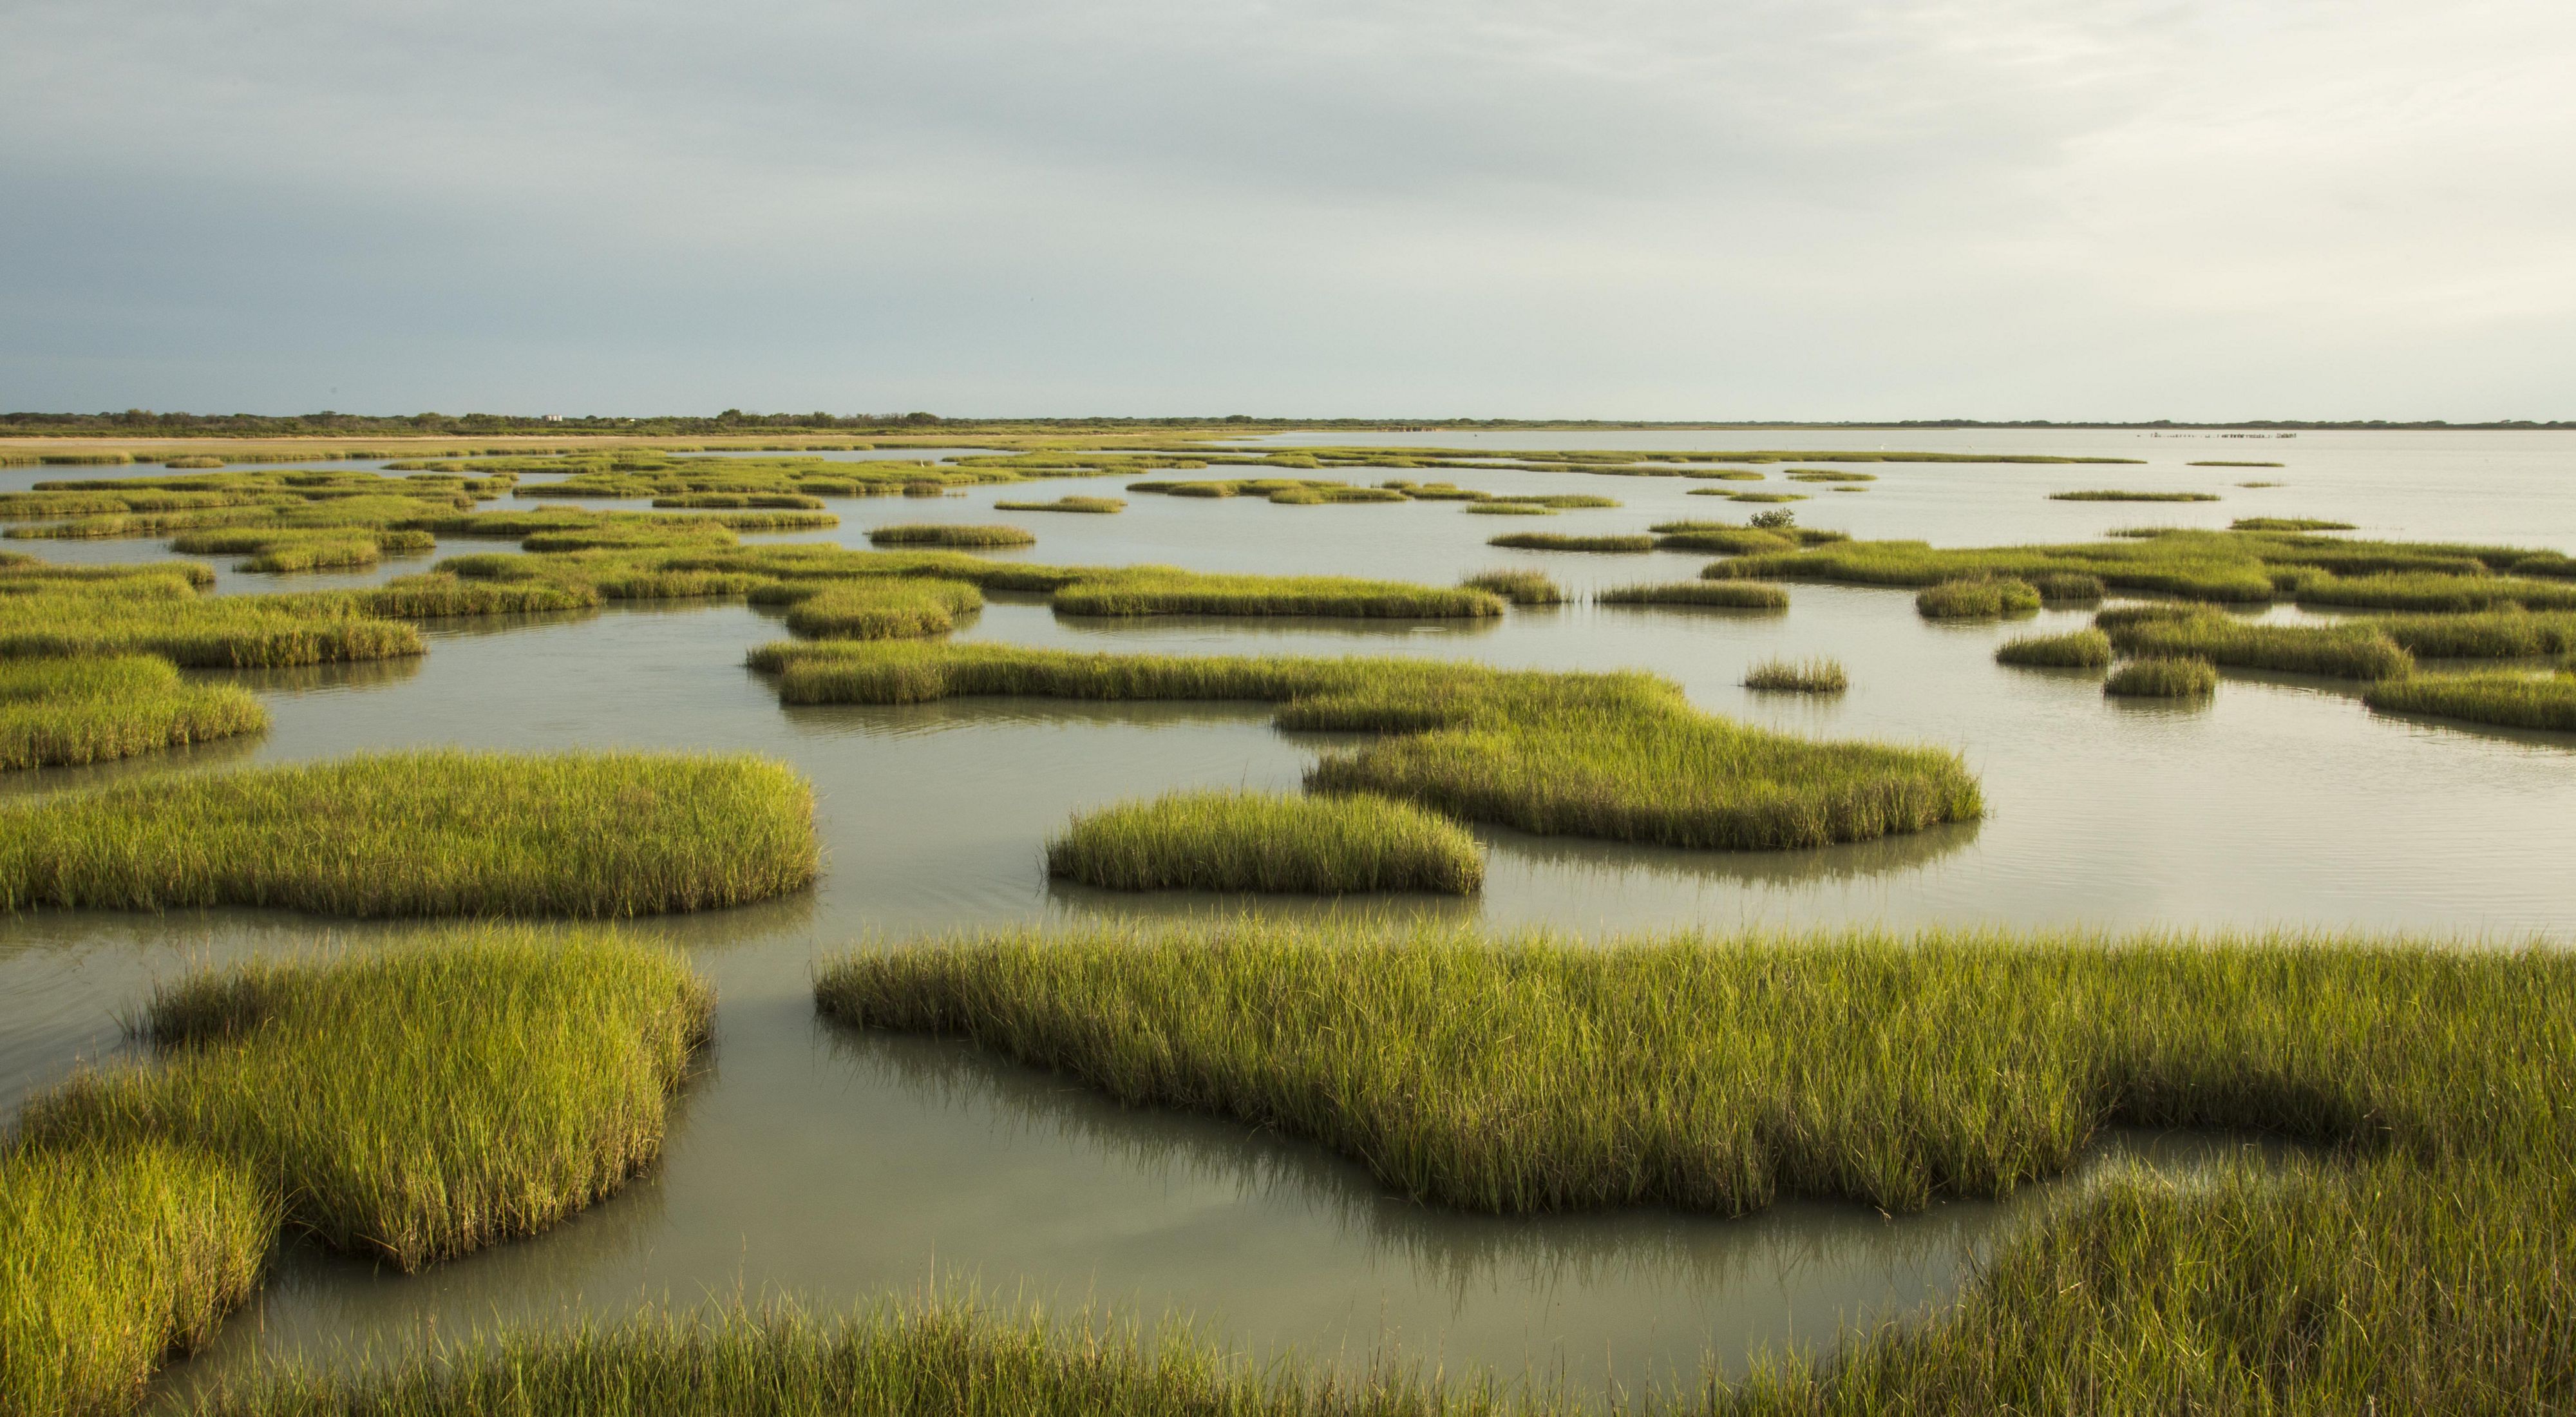 A broad expanse of salt marsh with patches of open water and patches of marsh grass.